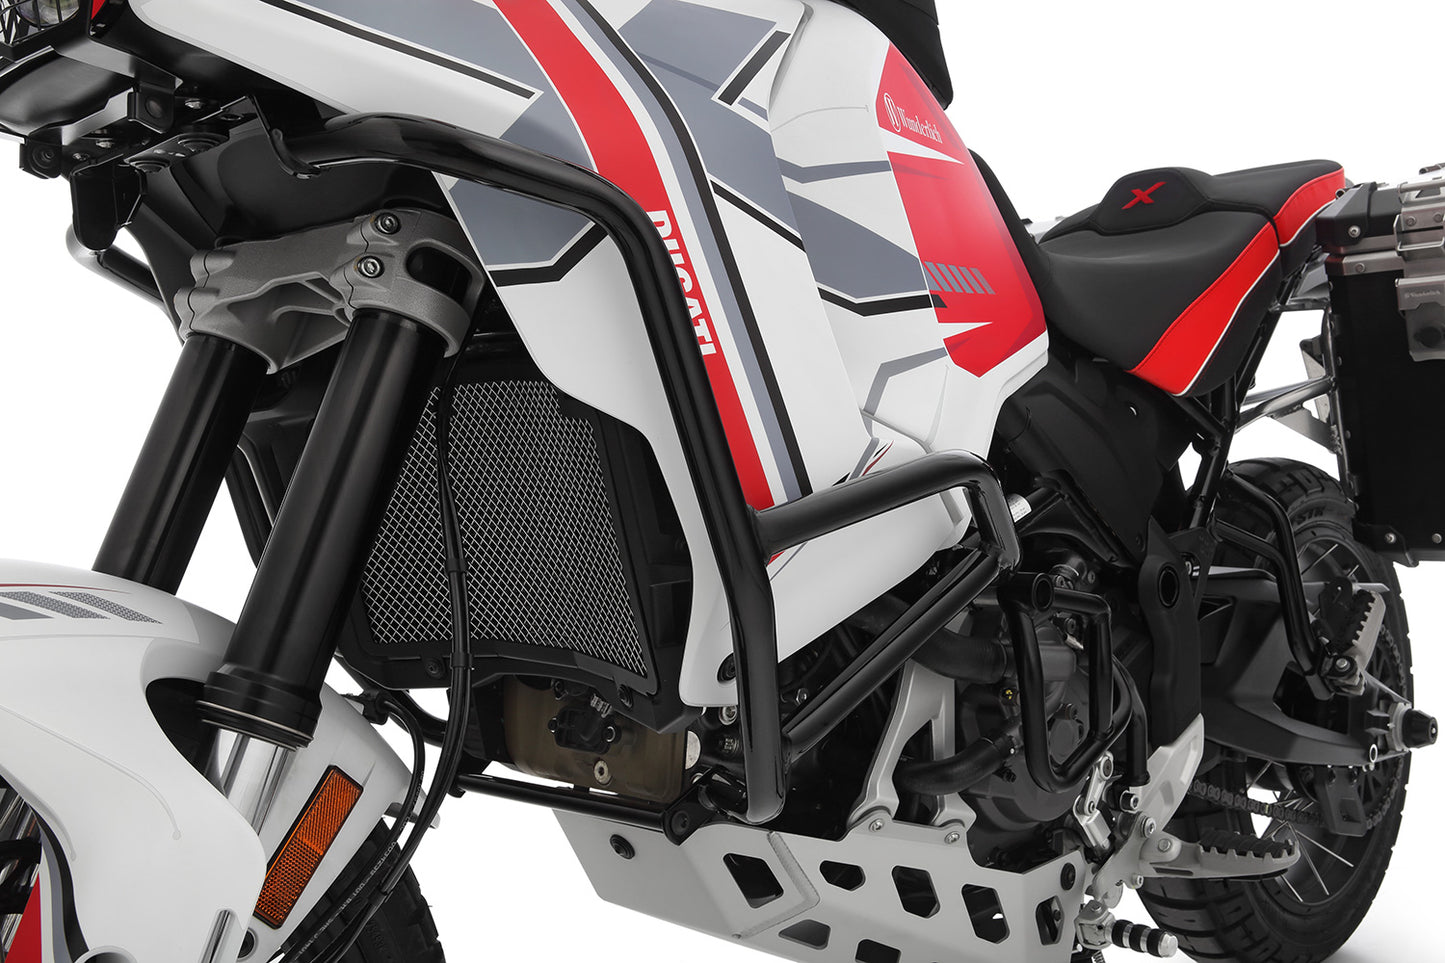 Wunderlich fairing protection bar - black - For models with Offroad engine protection